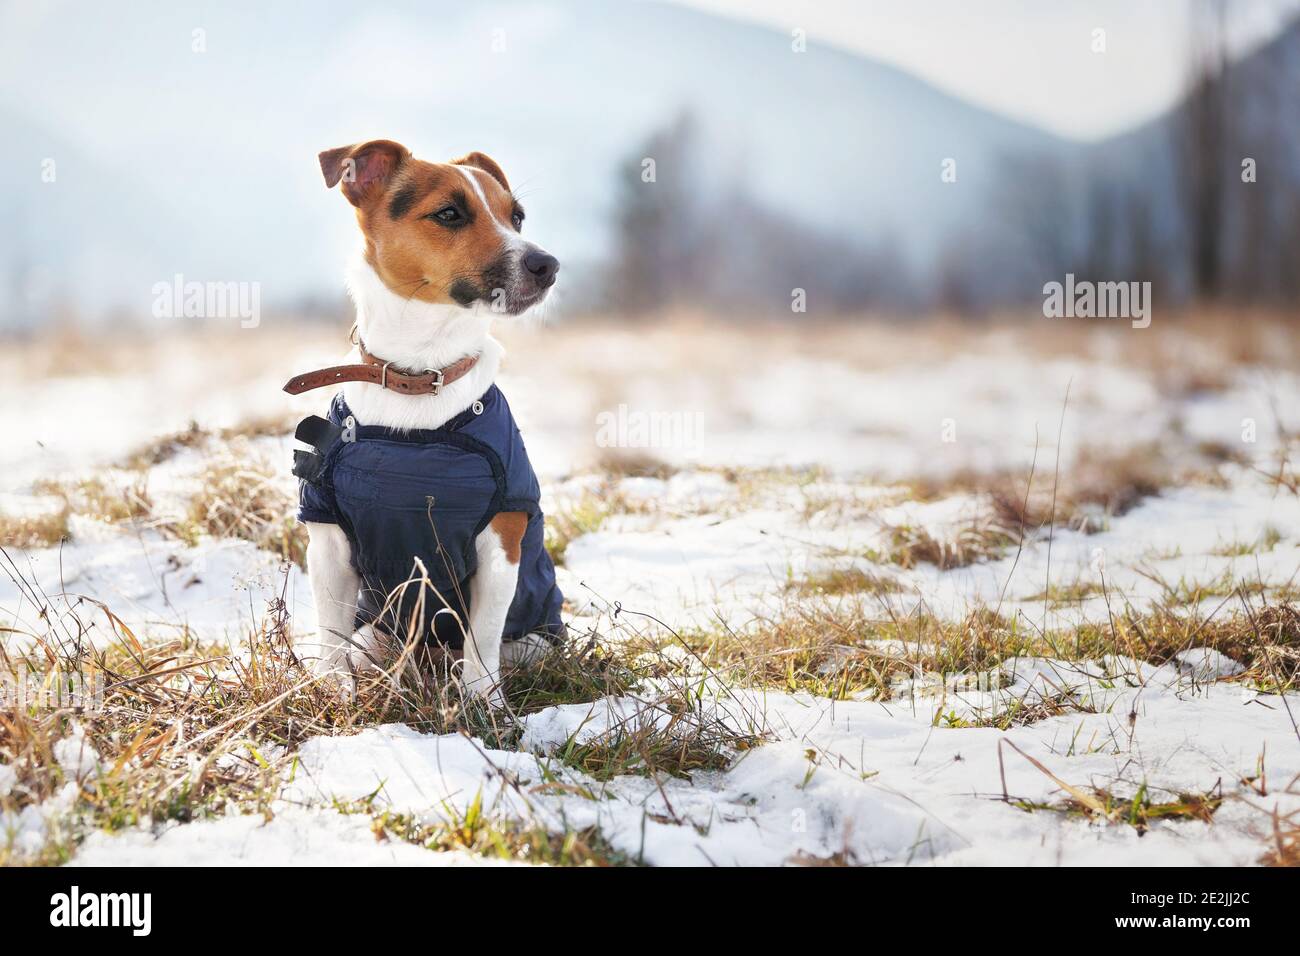 Small Jack Russell terrier in winter coat sitting at frozen ground with patches of snow on cold January sunny day, blurred trees and mountains backgro Stock Photo